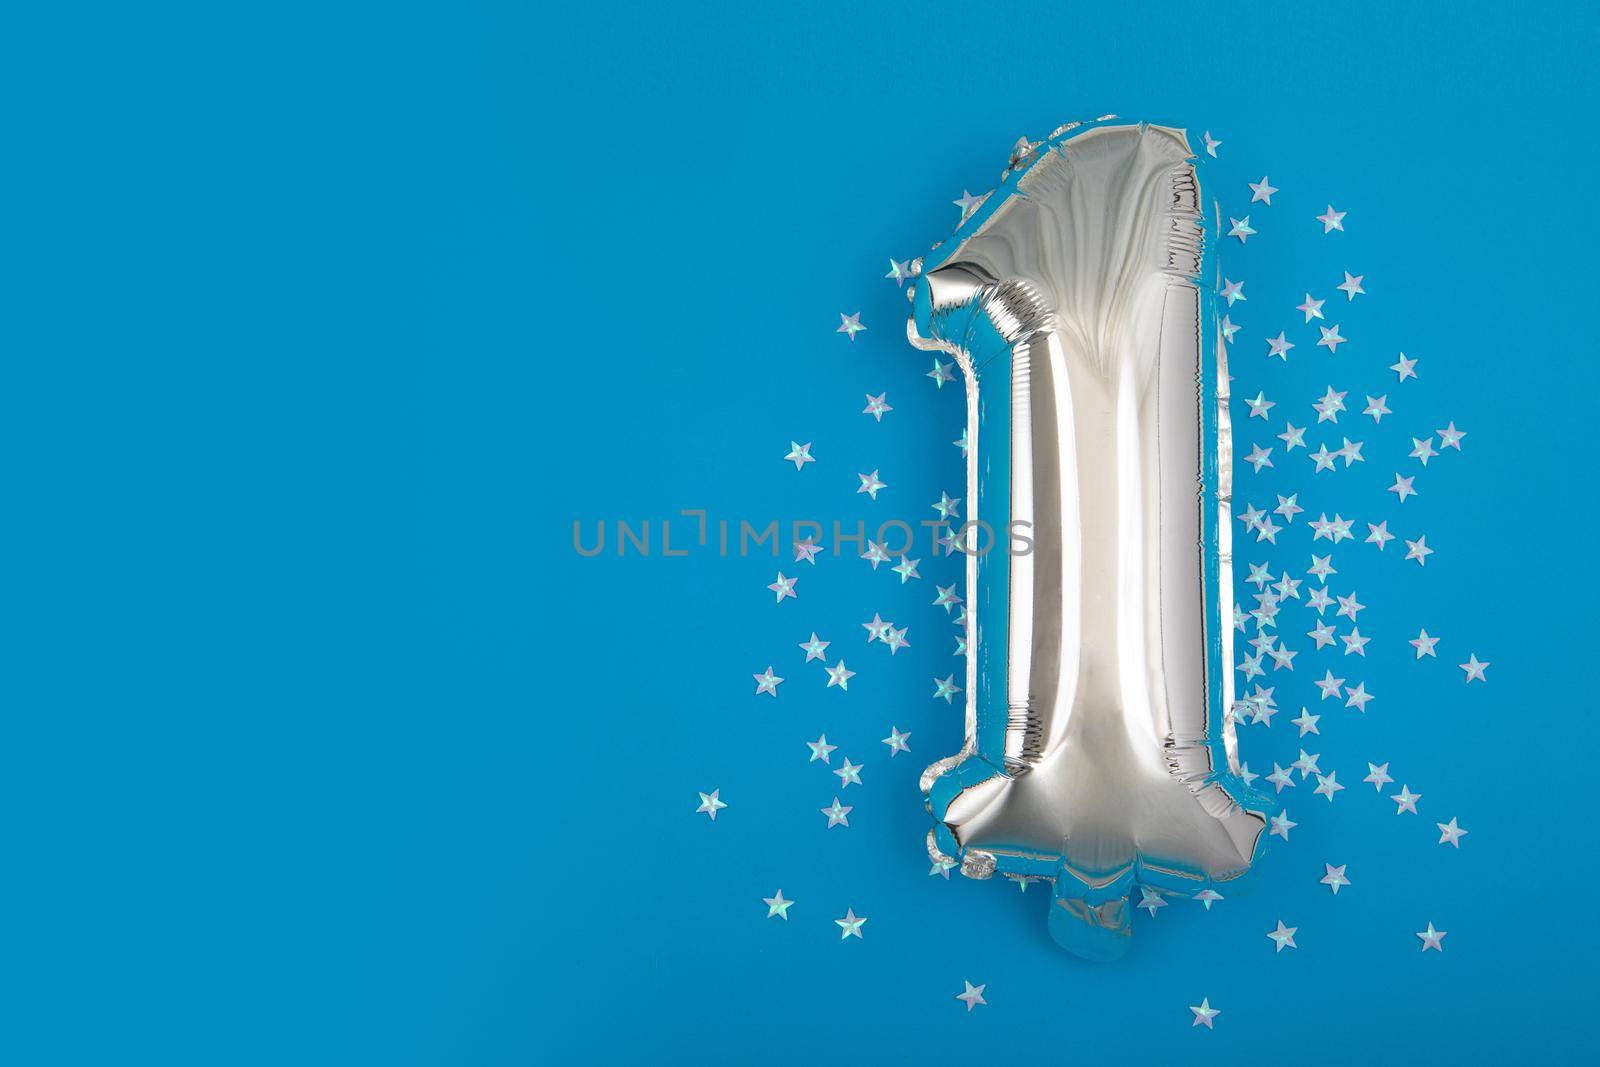 Silver balloon 1 on a blue background with confetti stars. Number One 1. Holiday Party Decoration or postcard concept with top view on blue background